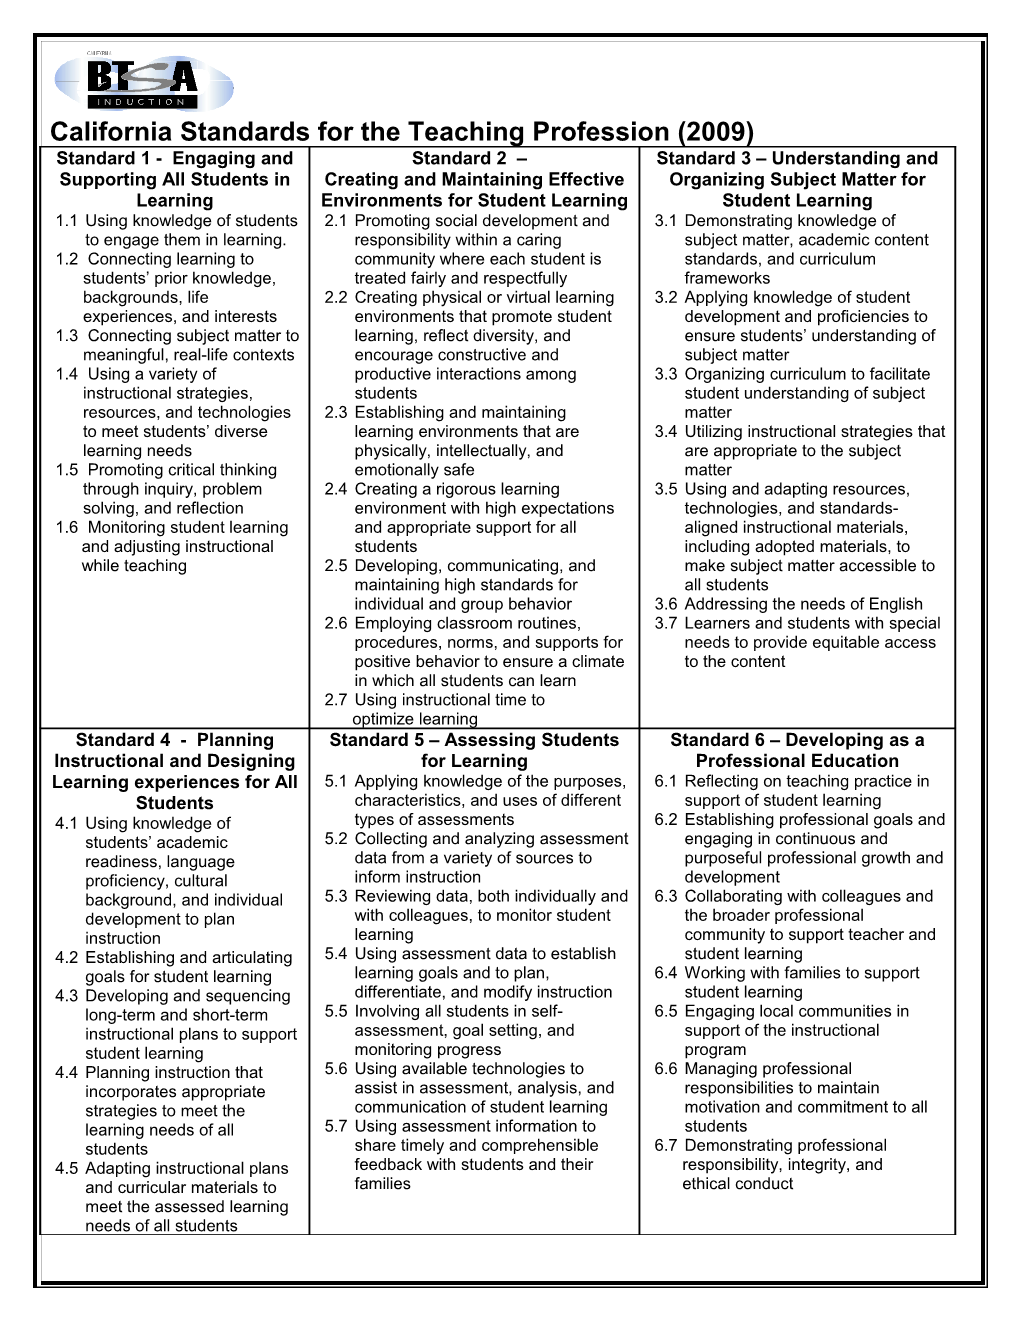 California Standards for the Teaching Profession (2009)